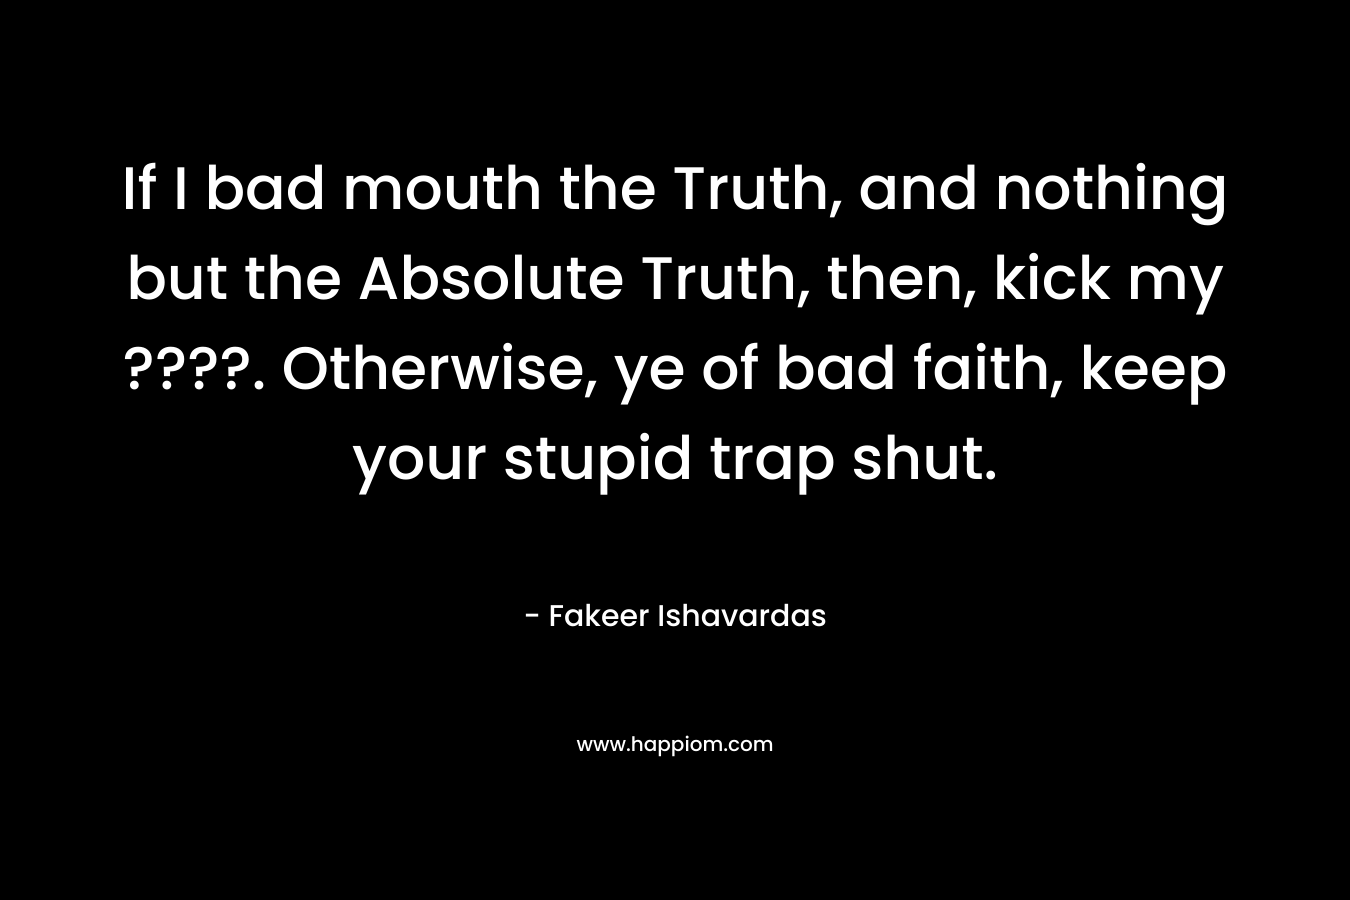 If I bad mouth the Truth, and nothing but the Absolute Truth, then, kick my ????. Otherwise, ye of bad faith, keep your stupid trap shut. – Fakeer Ishavardas